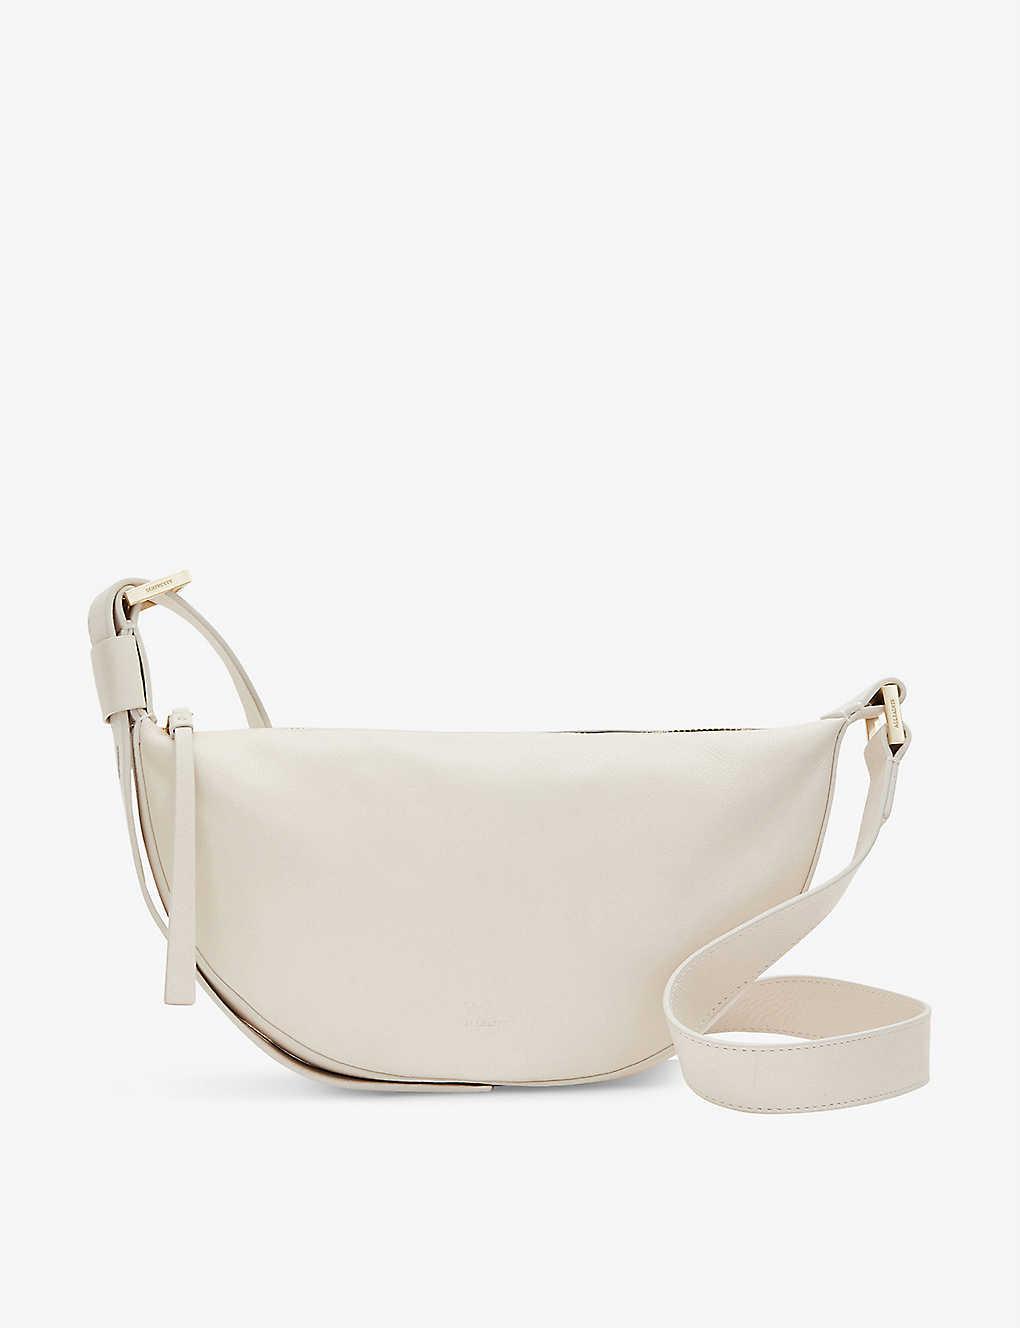 AllSaints Half Moon Leather Cross-body Bag in Natural | Lyst Canada